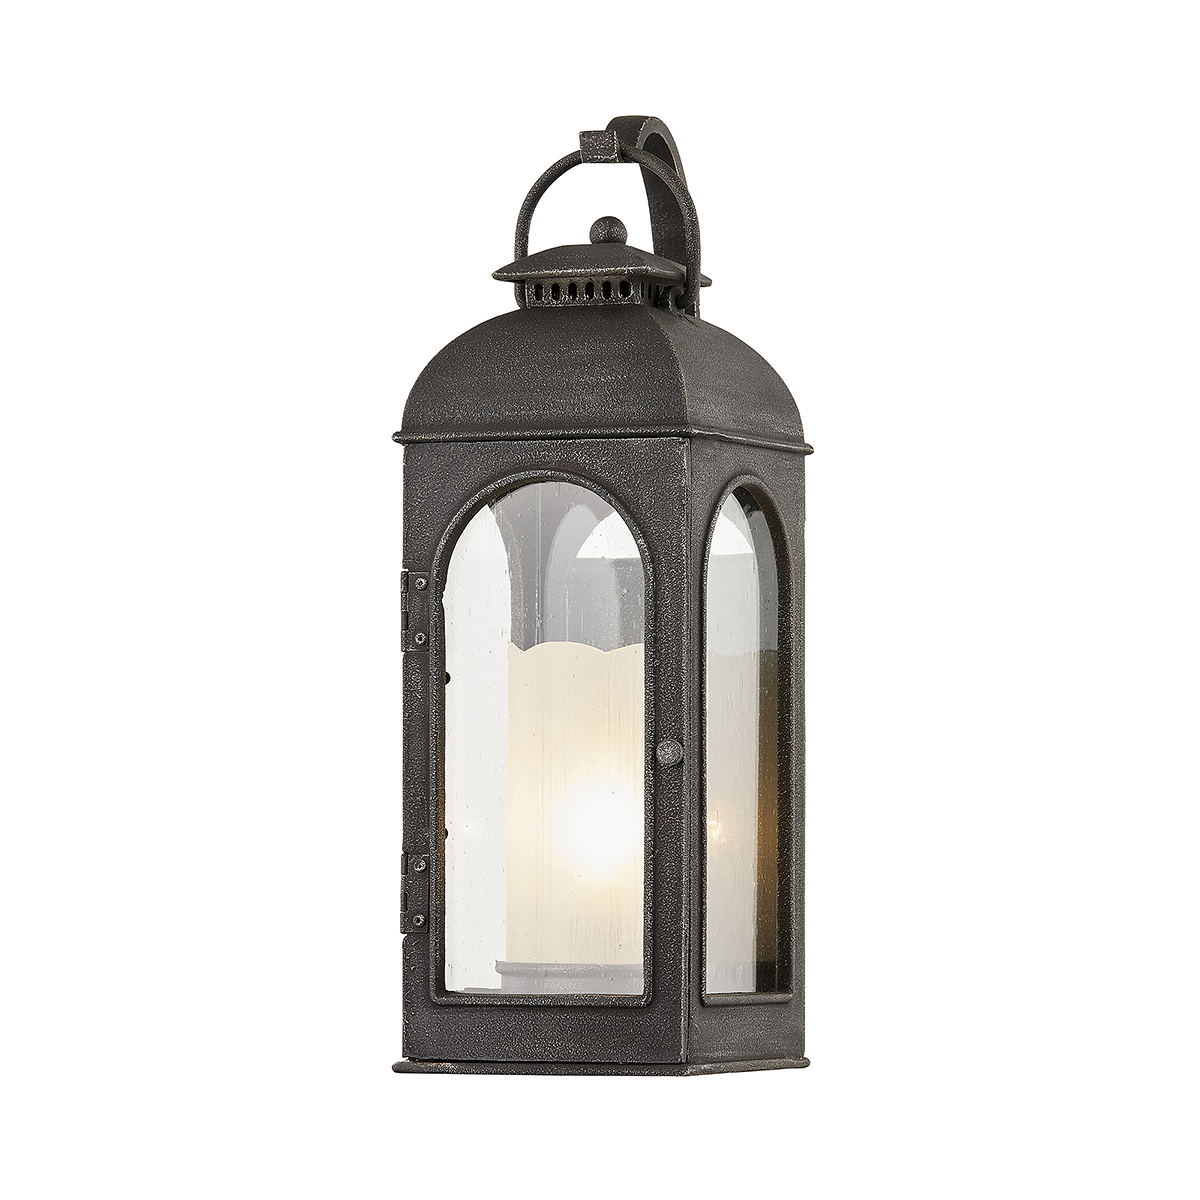 Troy Lighting DERBY 1LT WALL B7751 Outdoor l Wall Troy Lighting AGED PEWTER  